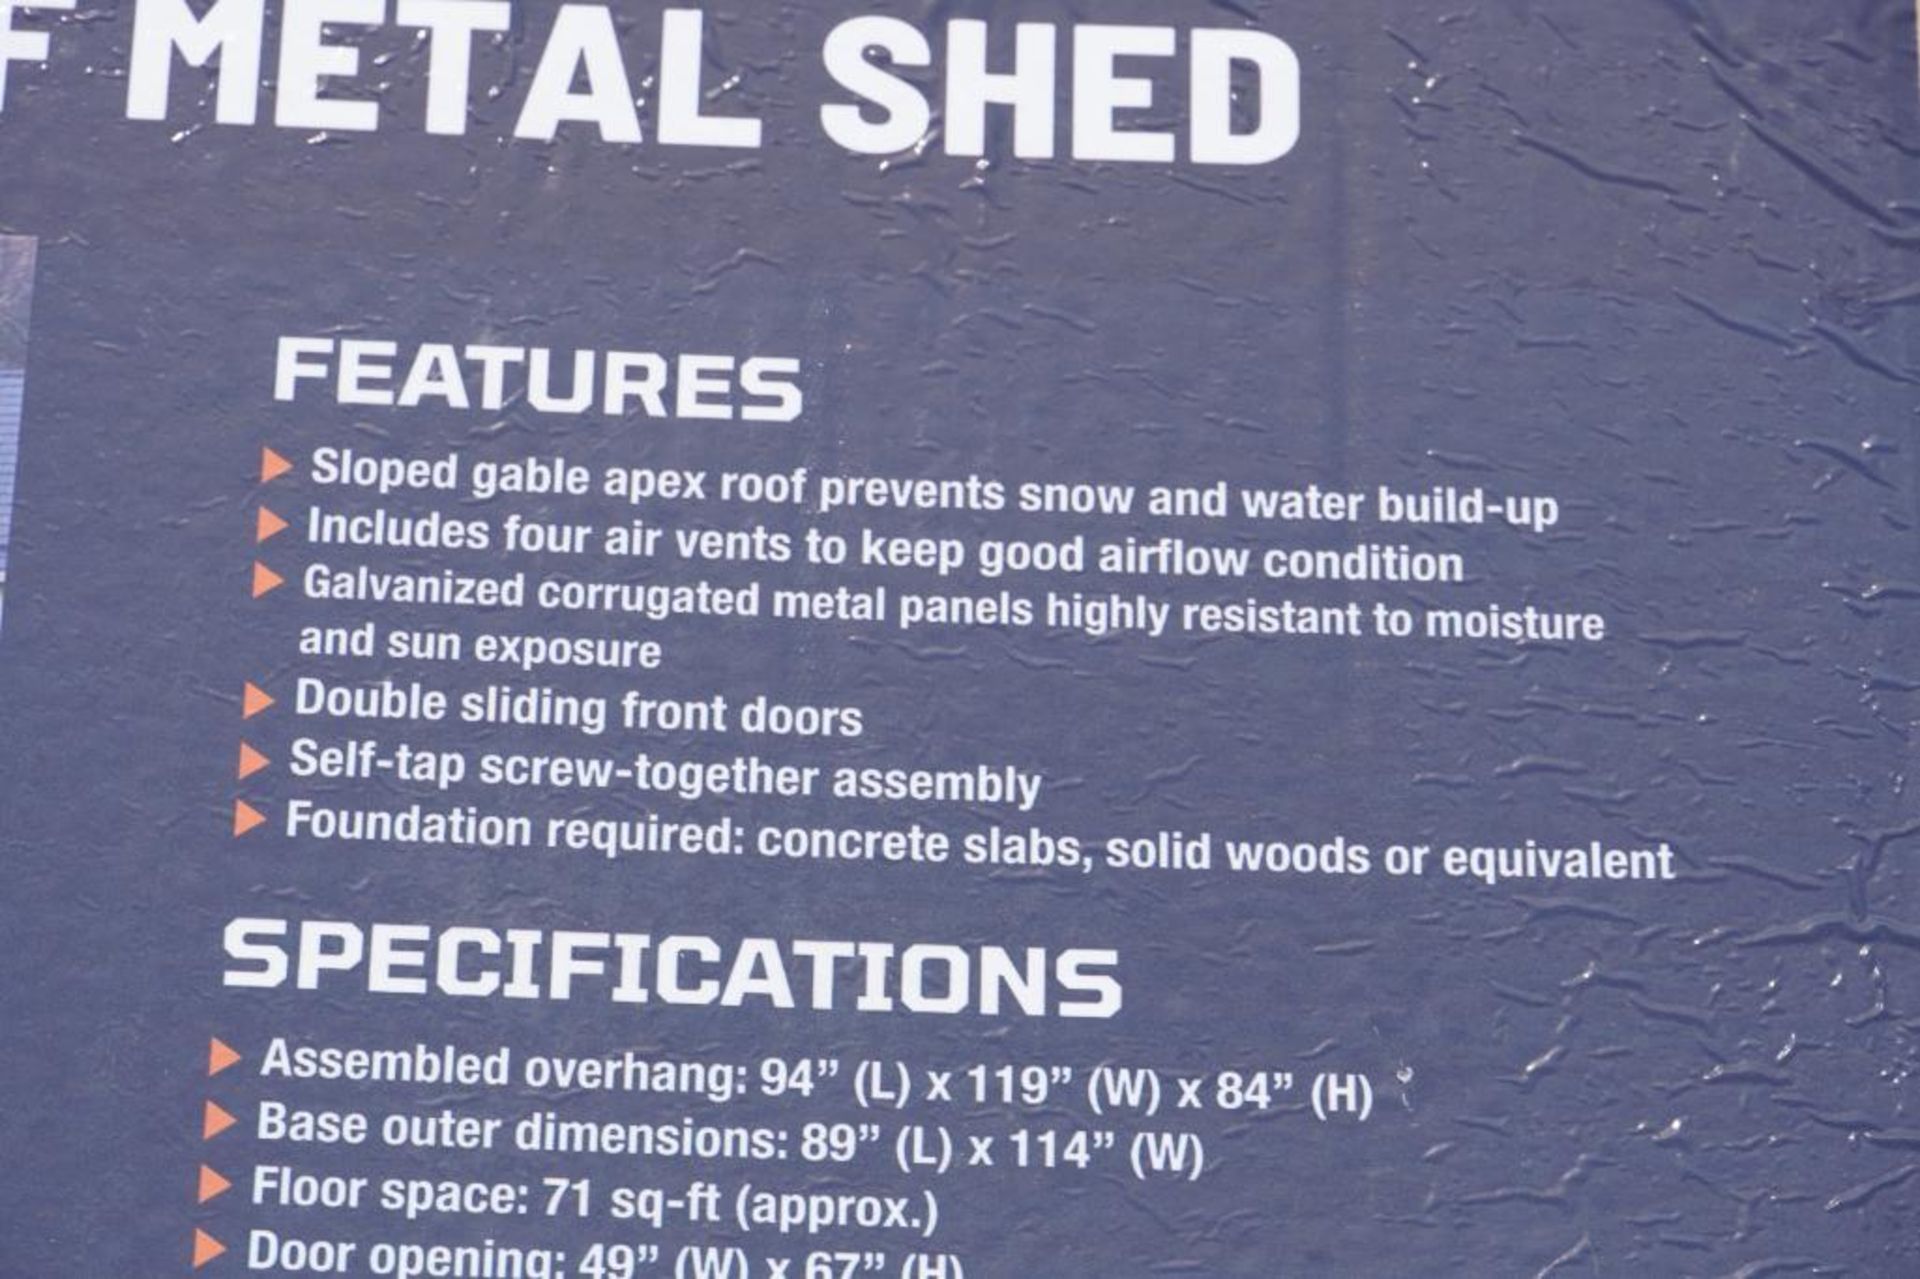 New TMG-MS0810 Metal Shed - Image 2 of 5